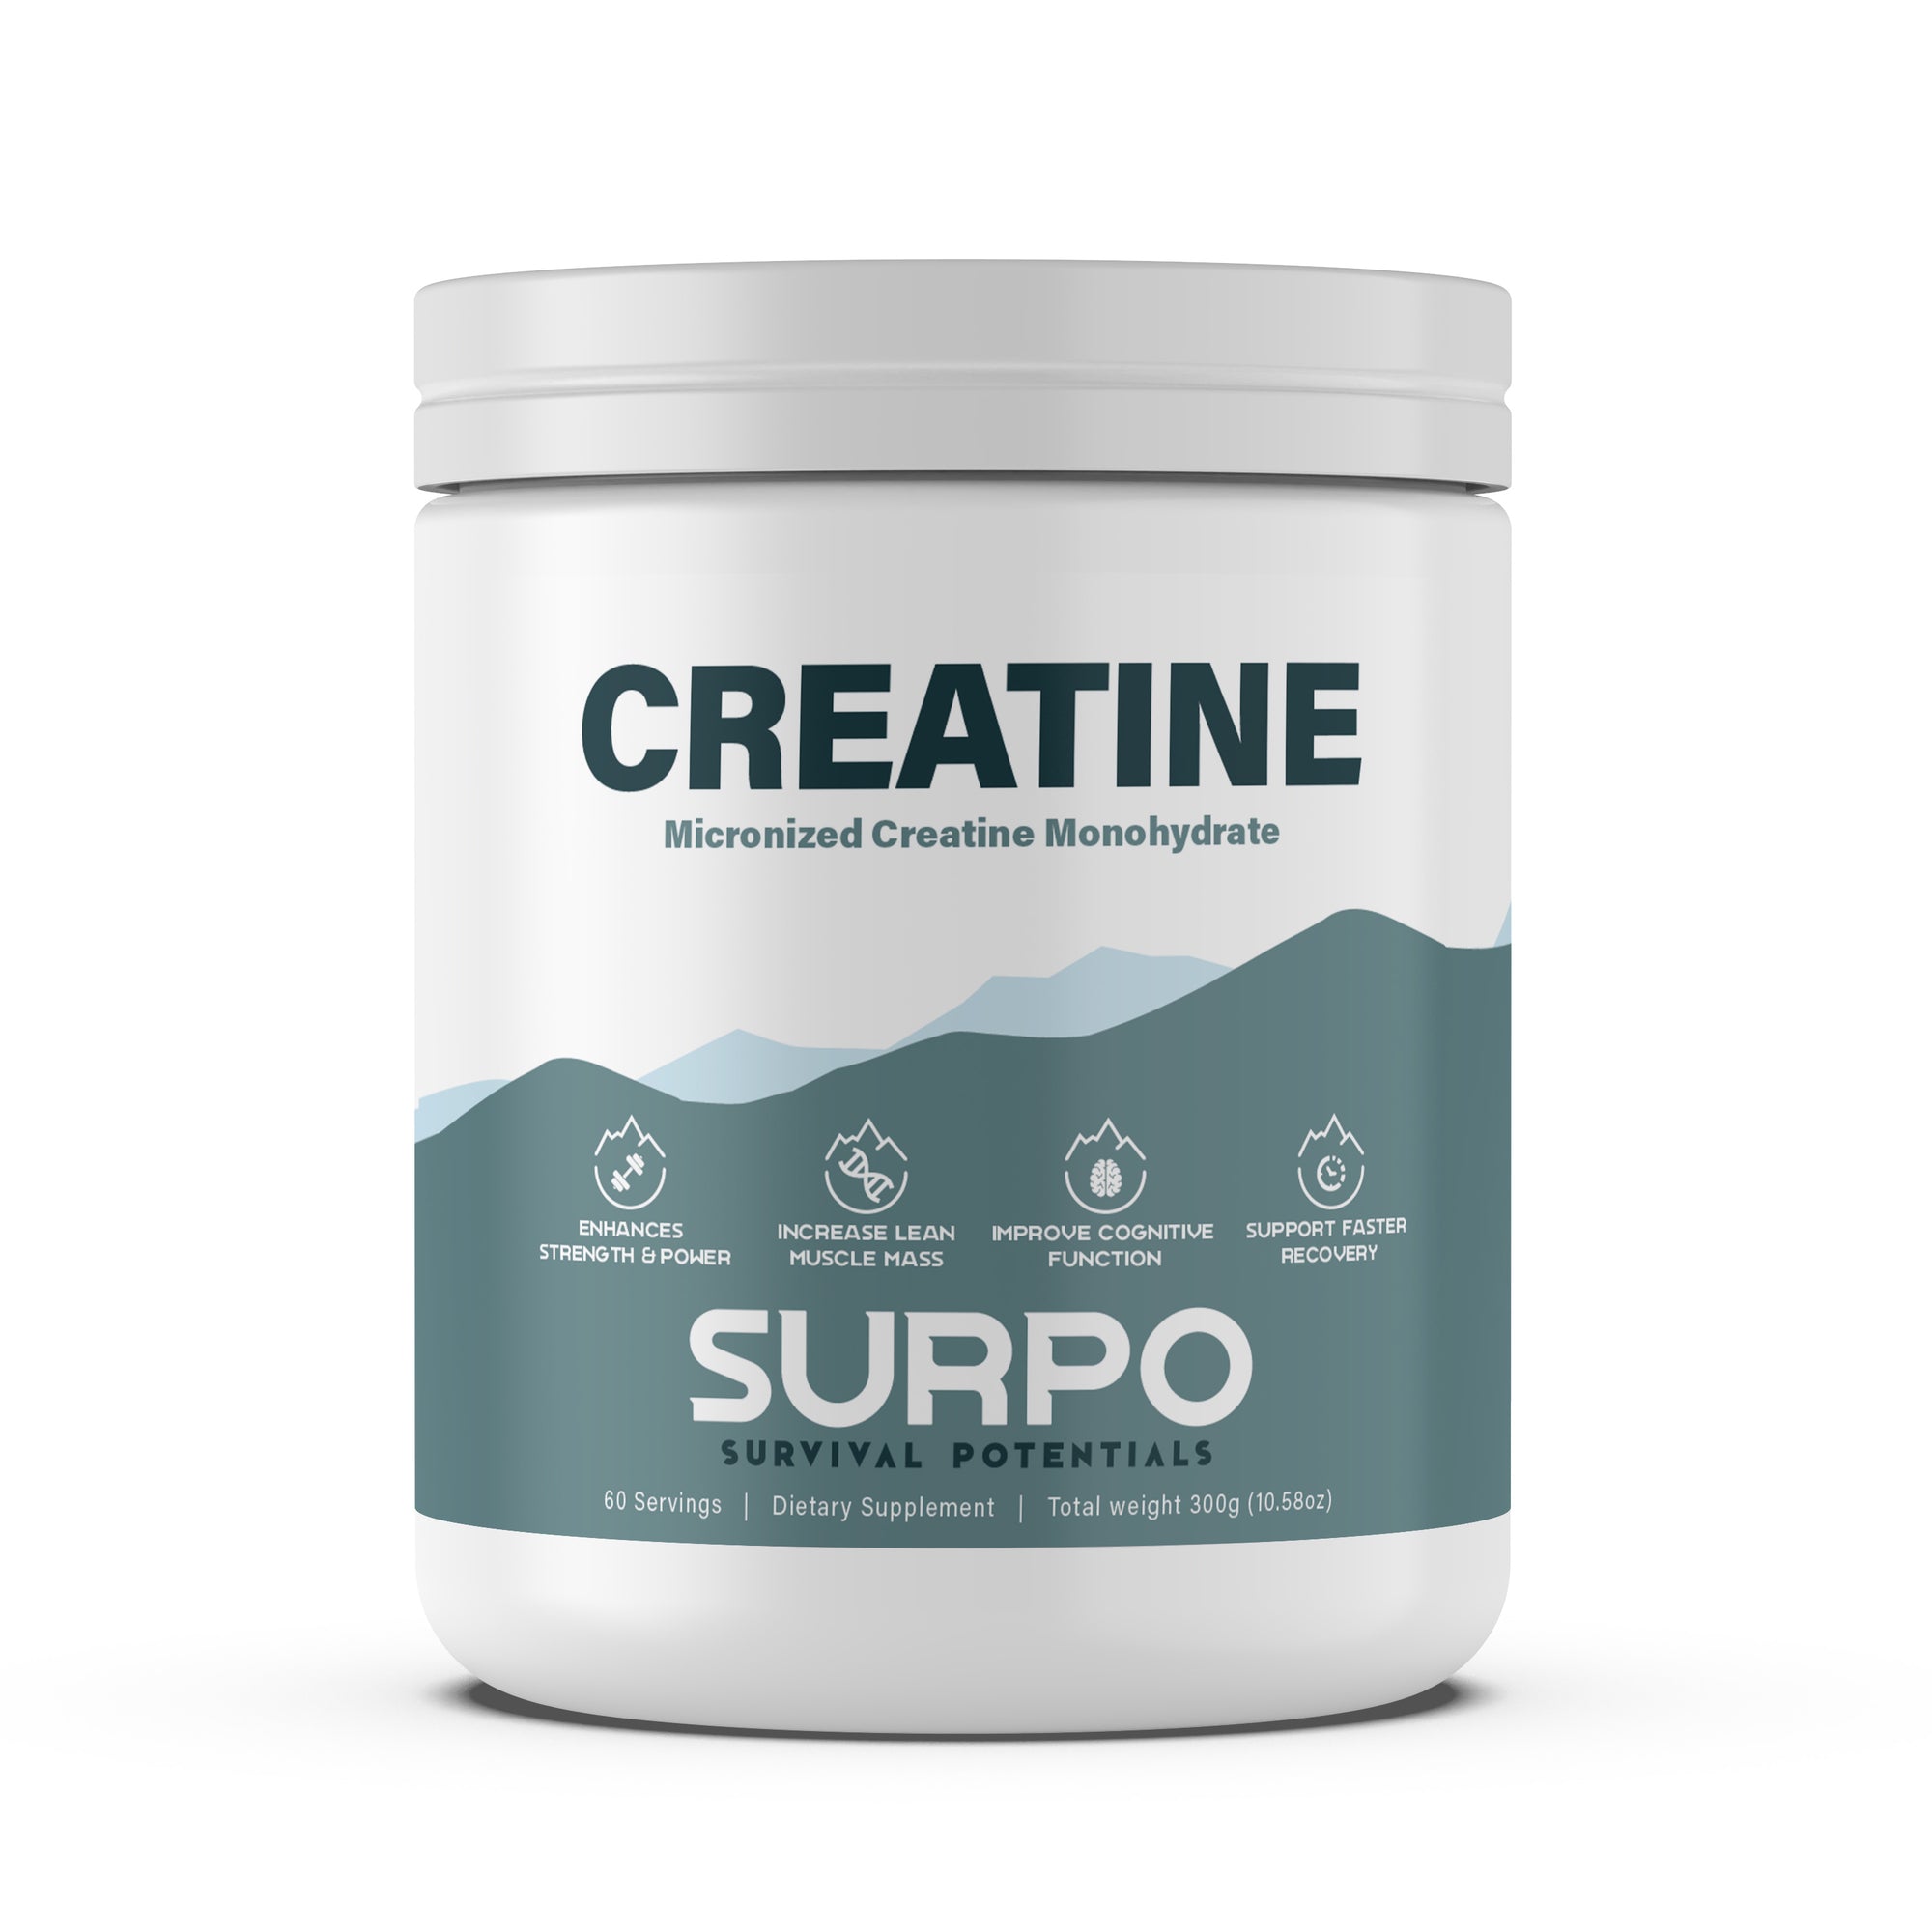 Creatine: The Powerhouse Supplement for Mind and Body